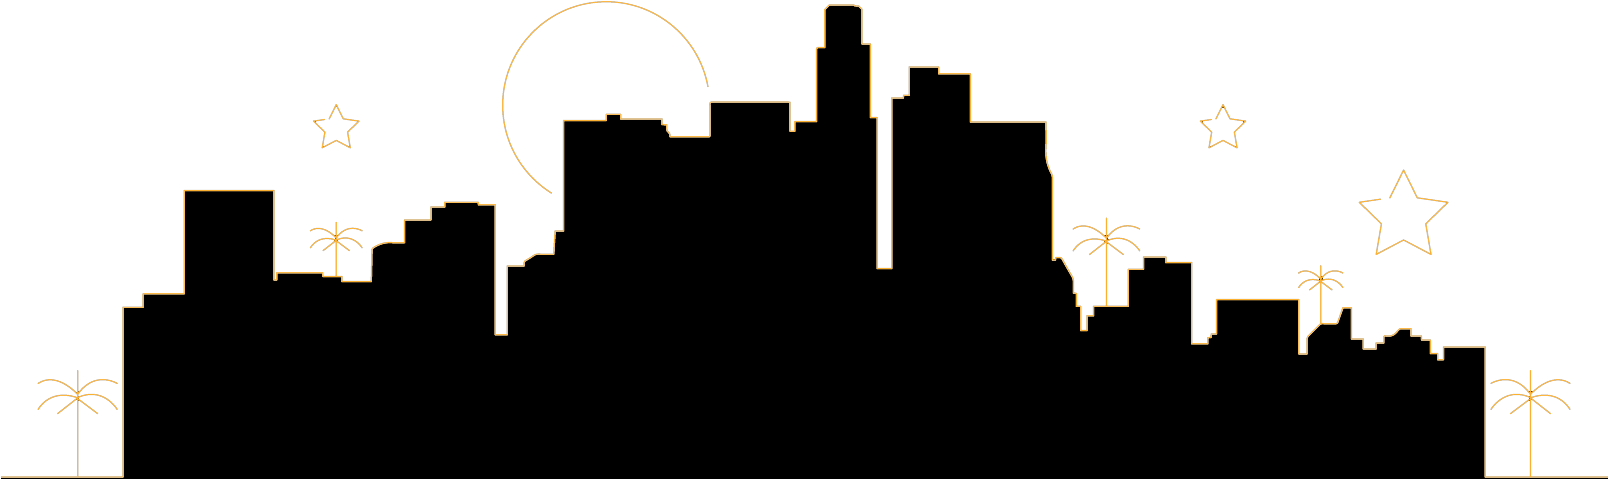 Cityscape Silhouette PNG HD Image